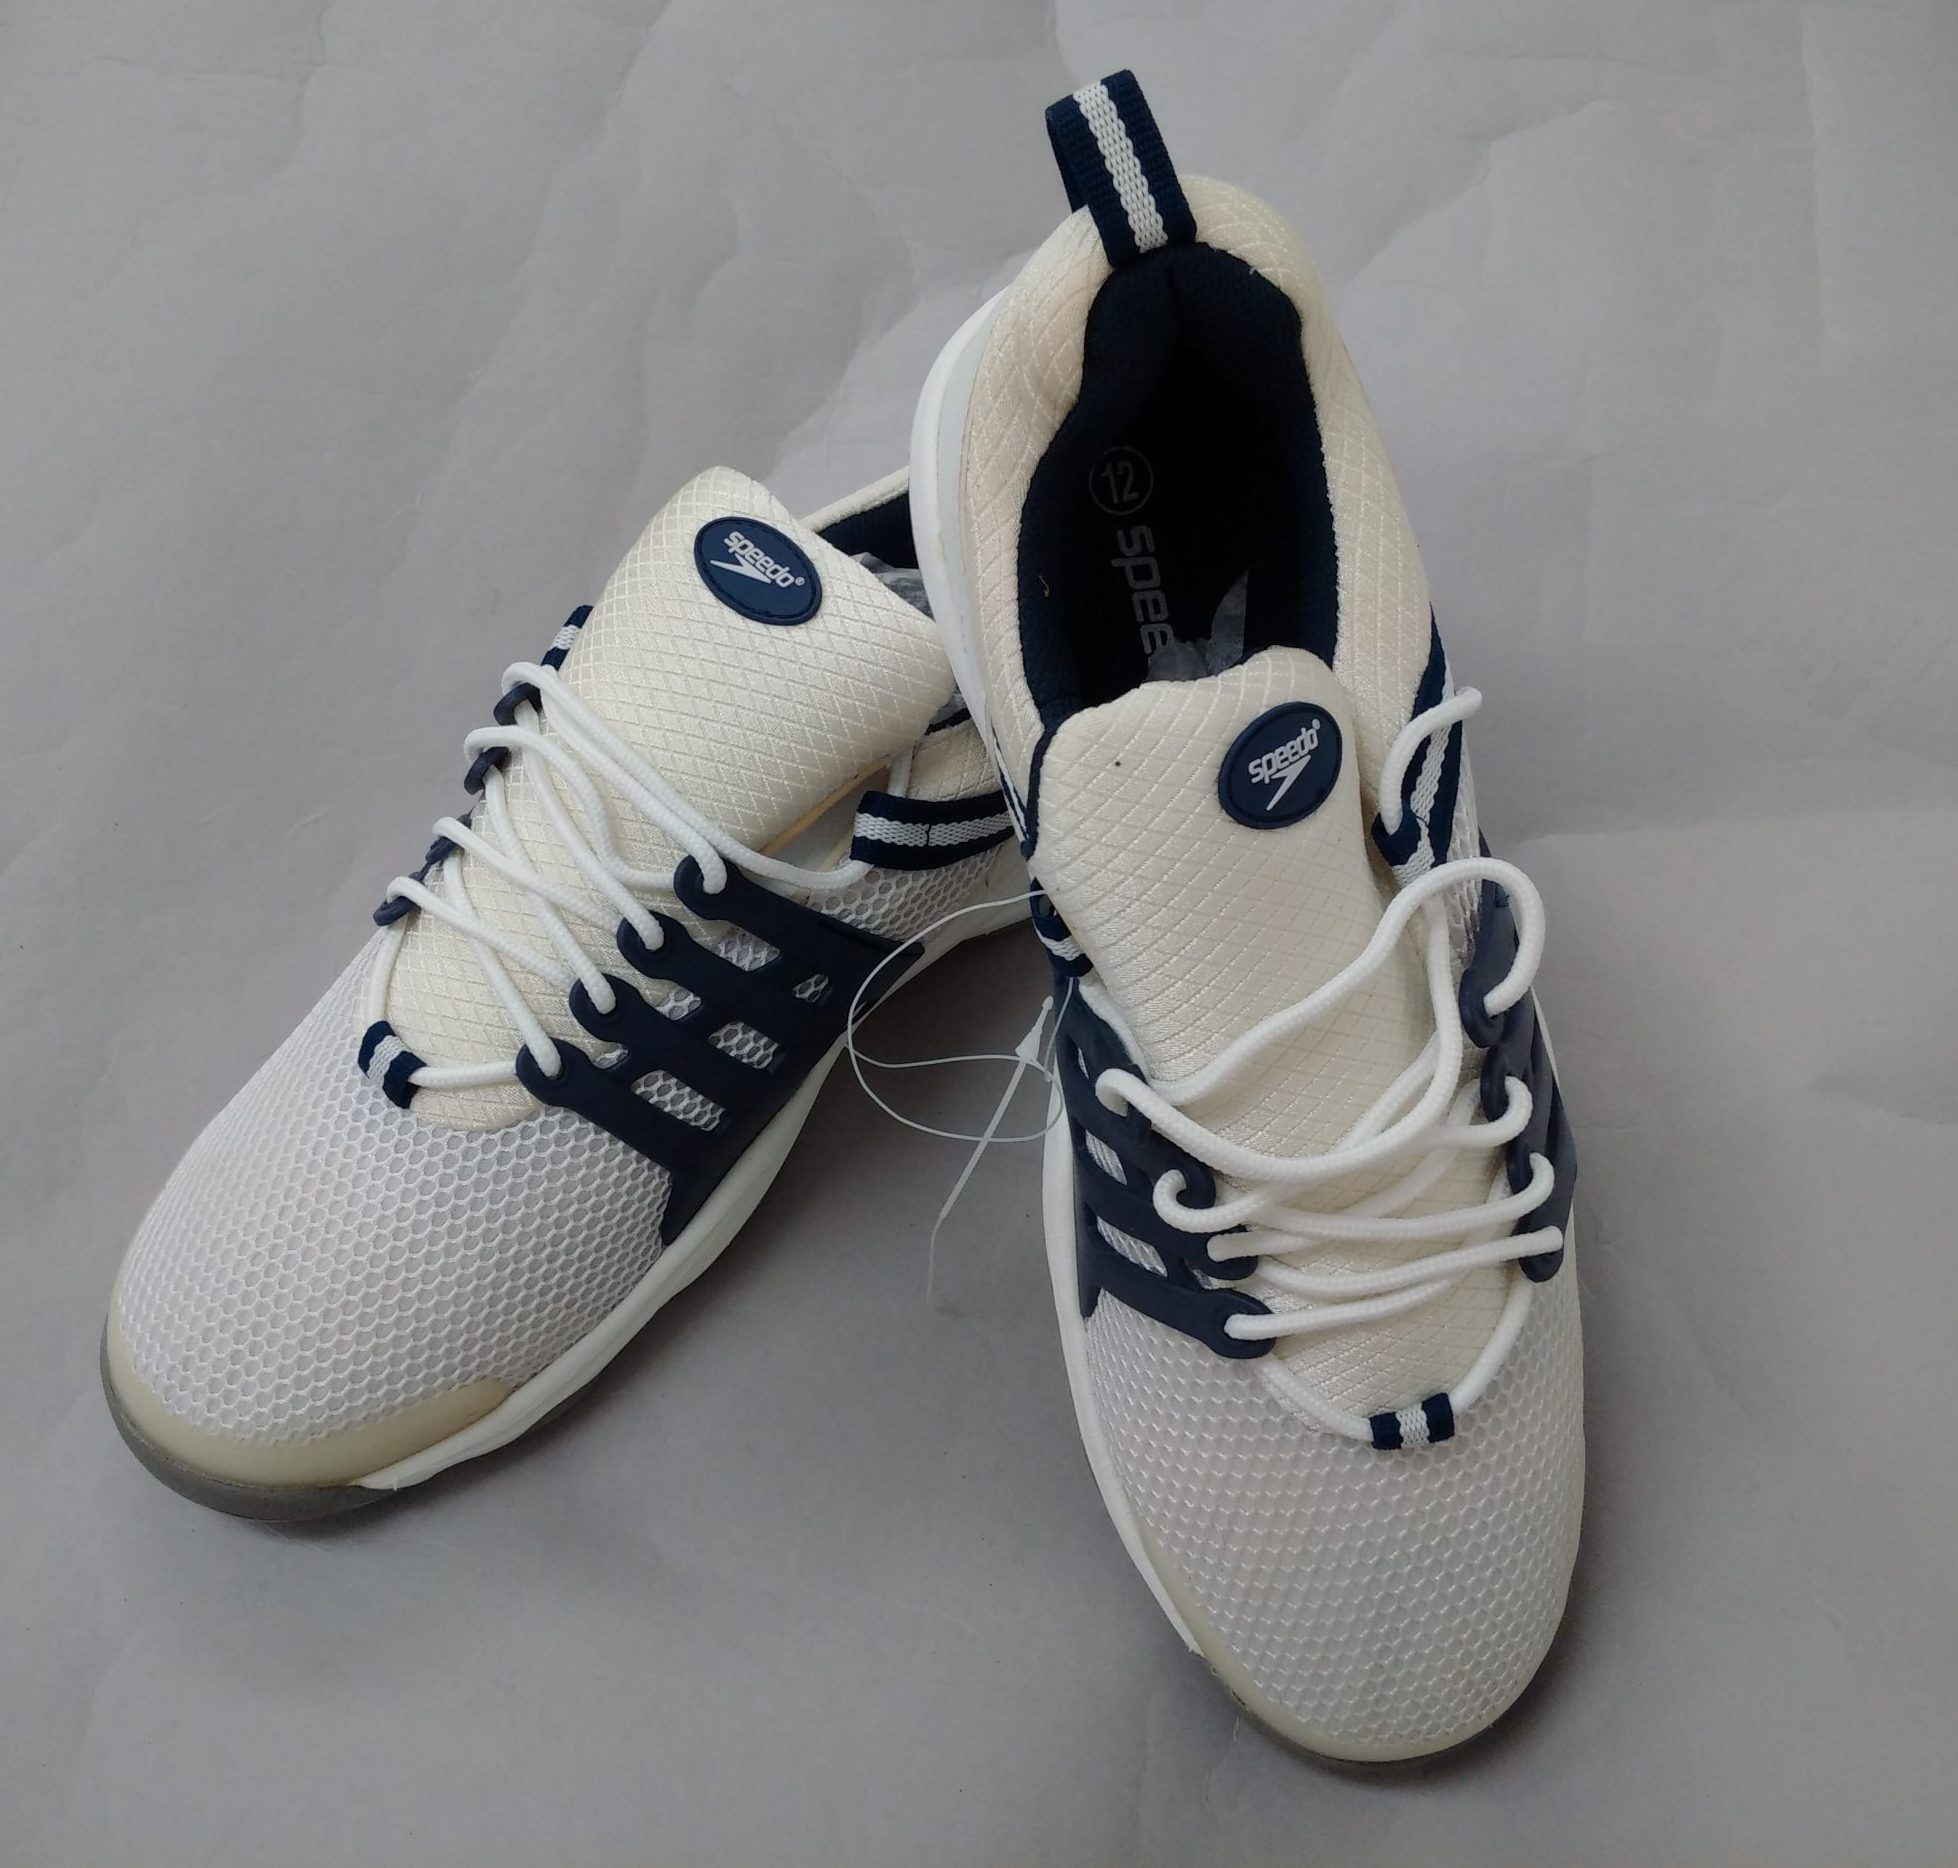 mens trainers size 12 sale